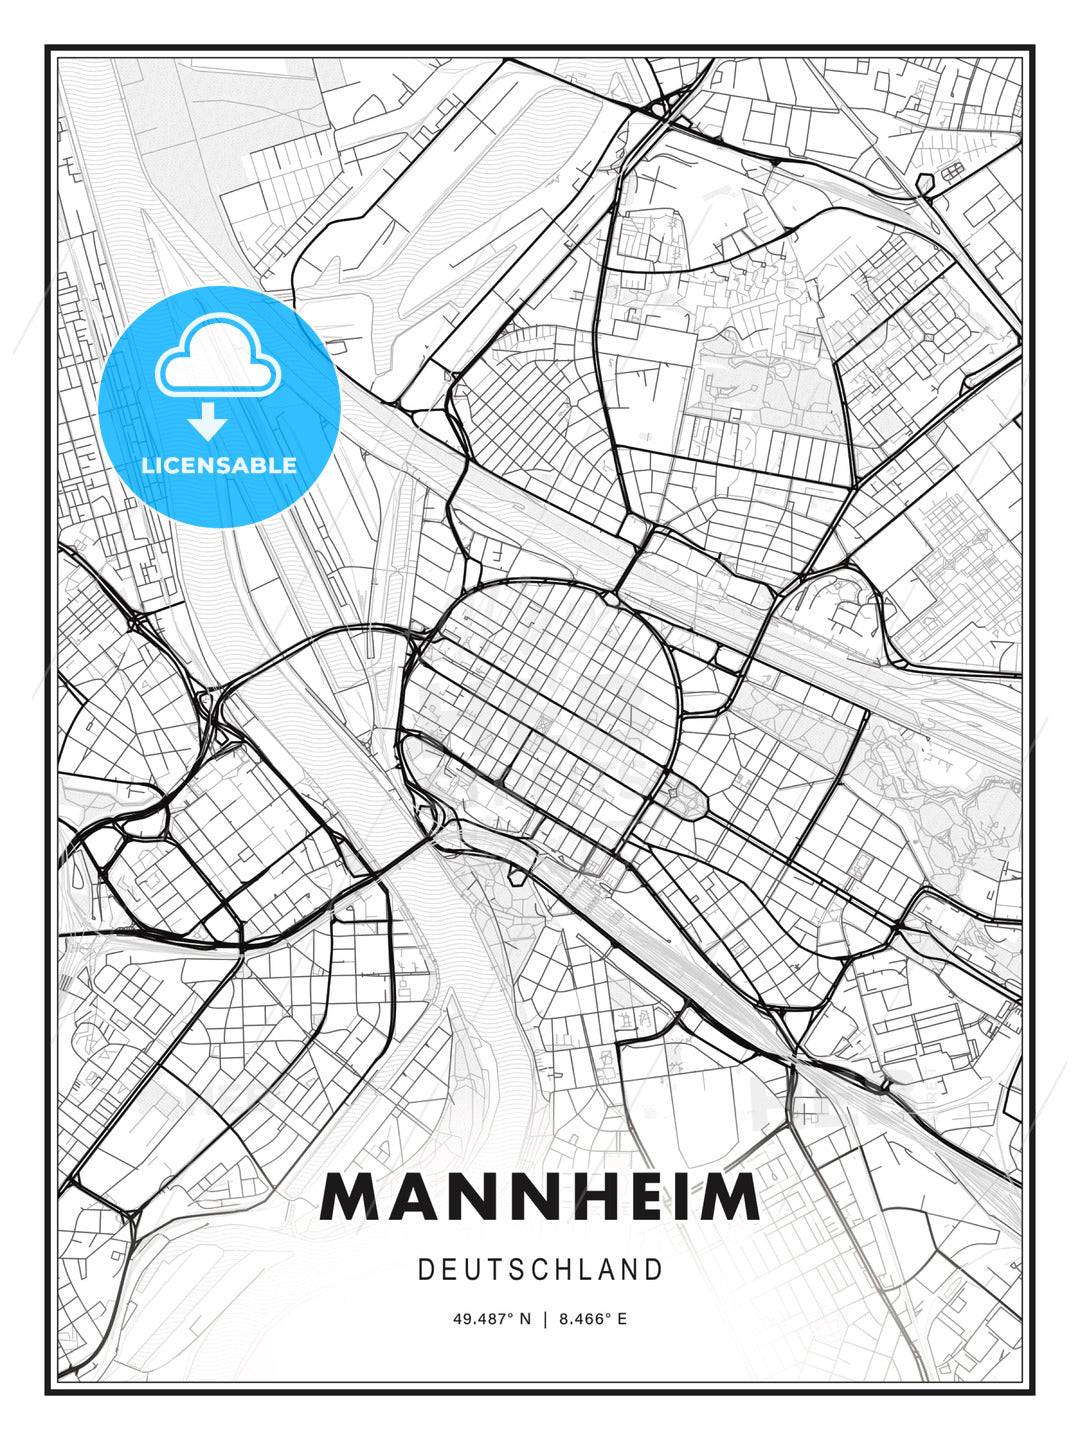 Mannheim, Germany, Modern Print Template in Various Formats - HEBSTREITS Sketches